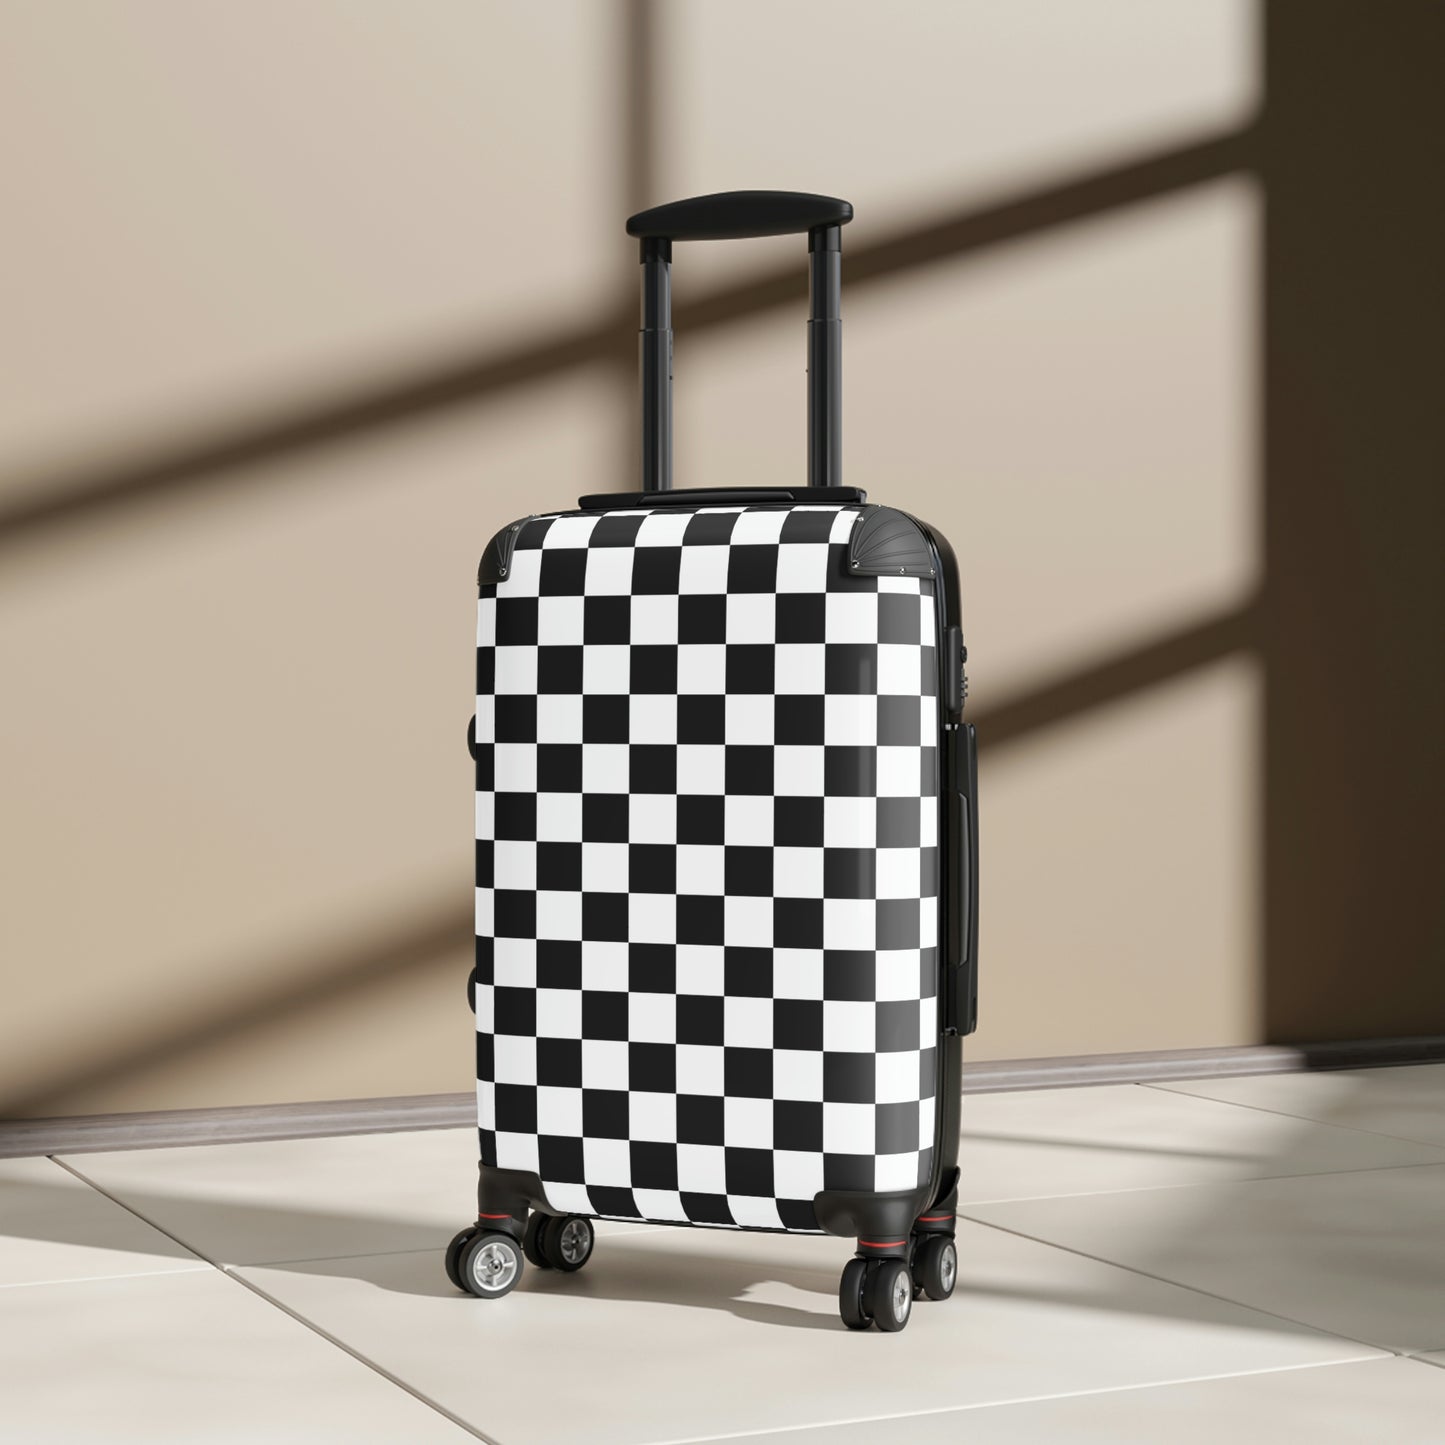 Checkered Suitcase Luggage with Wheels,  Cabin Black White Check Carry On Travel Bag Rolling Spinner Small Large Designer Hardcase Starcove Fashion